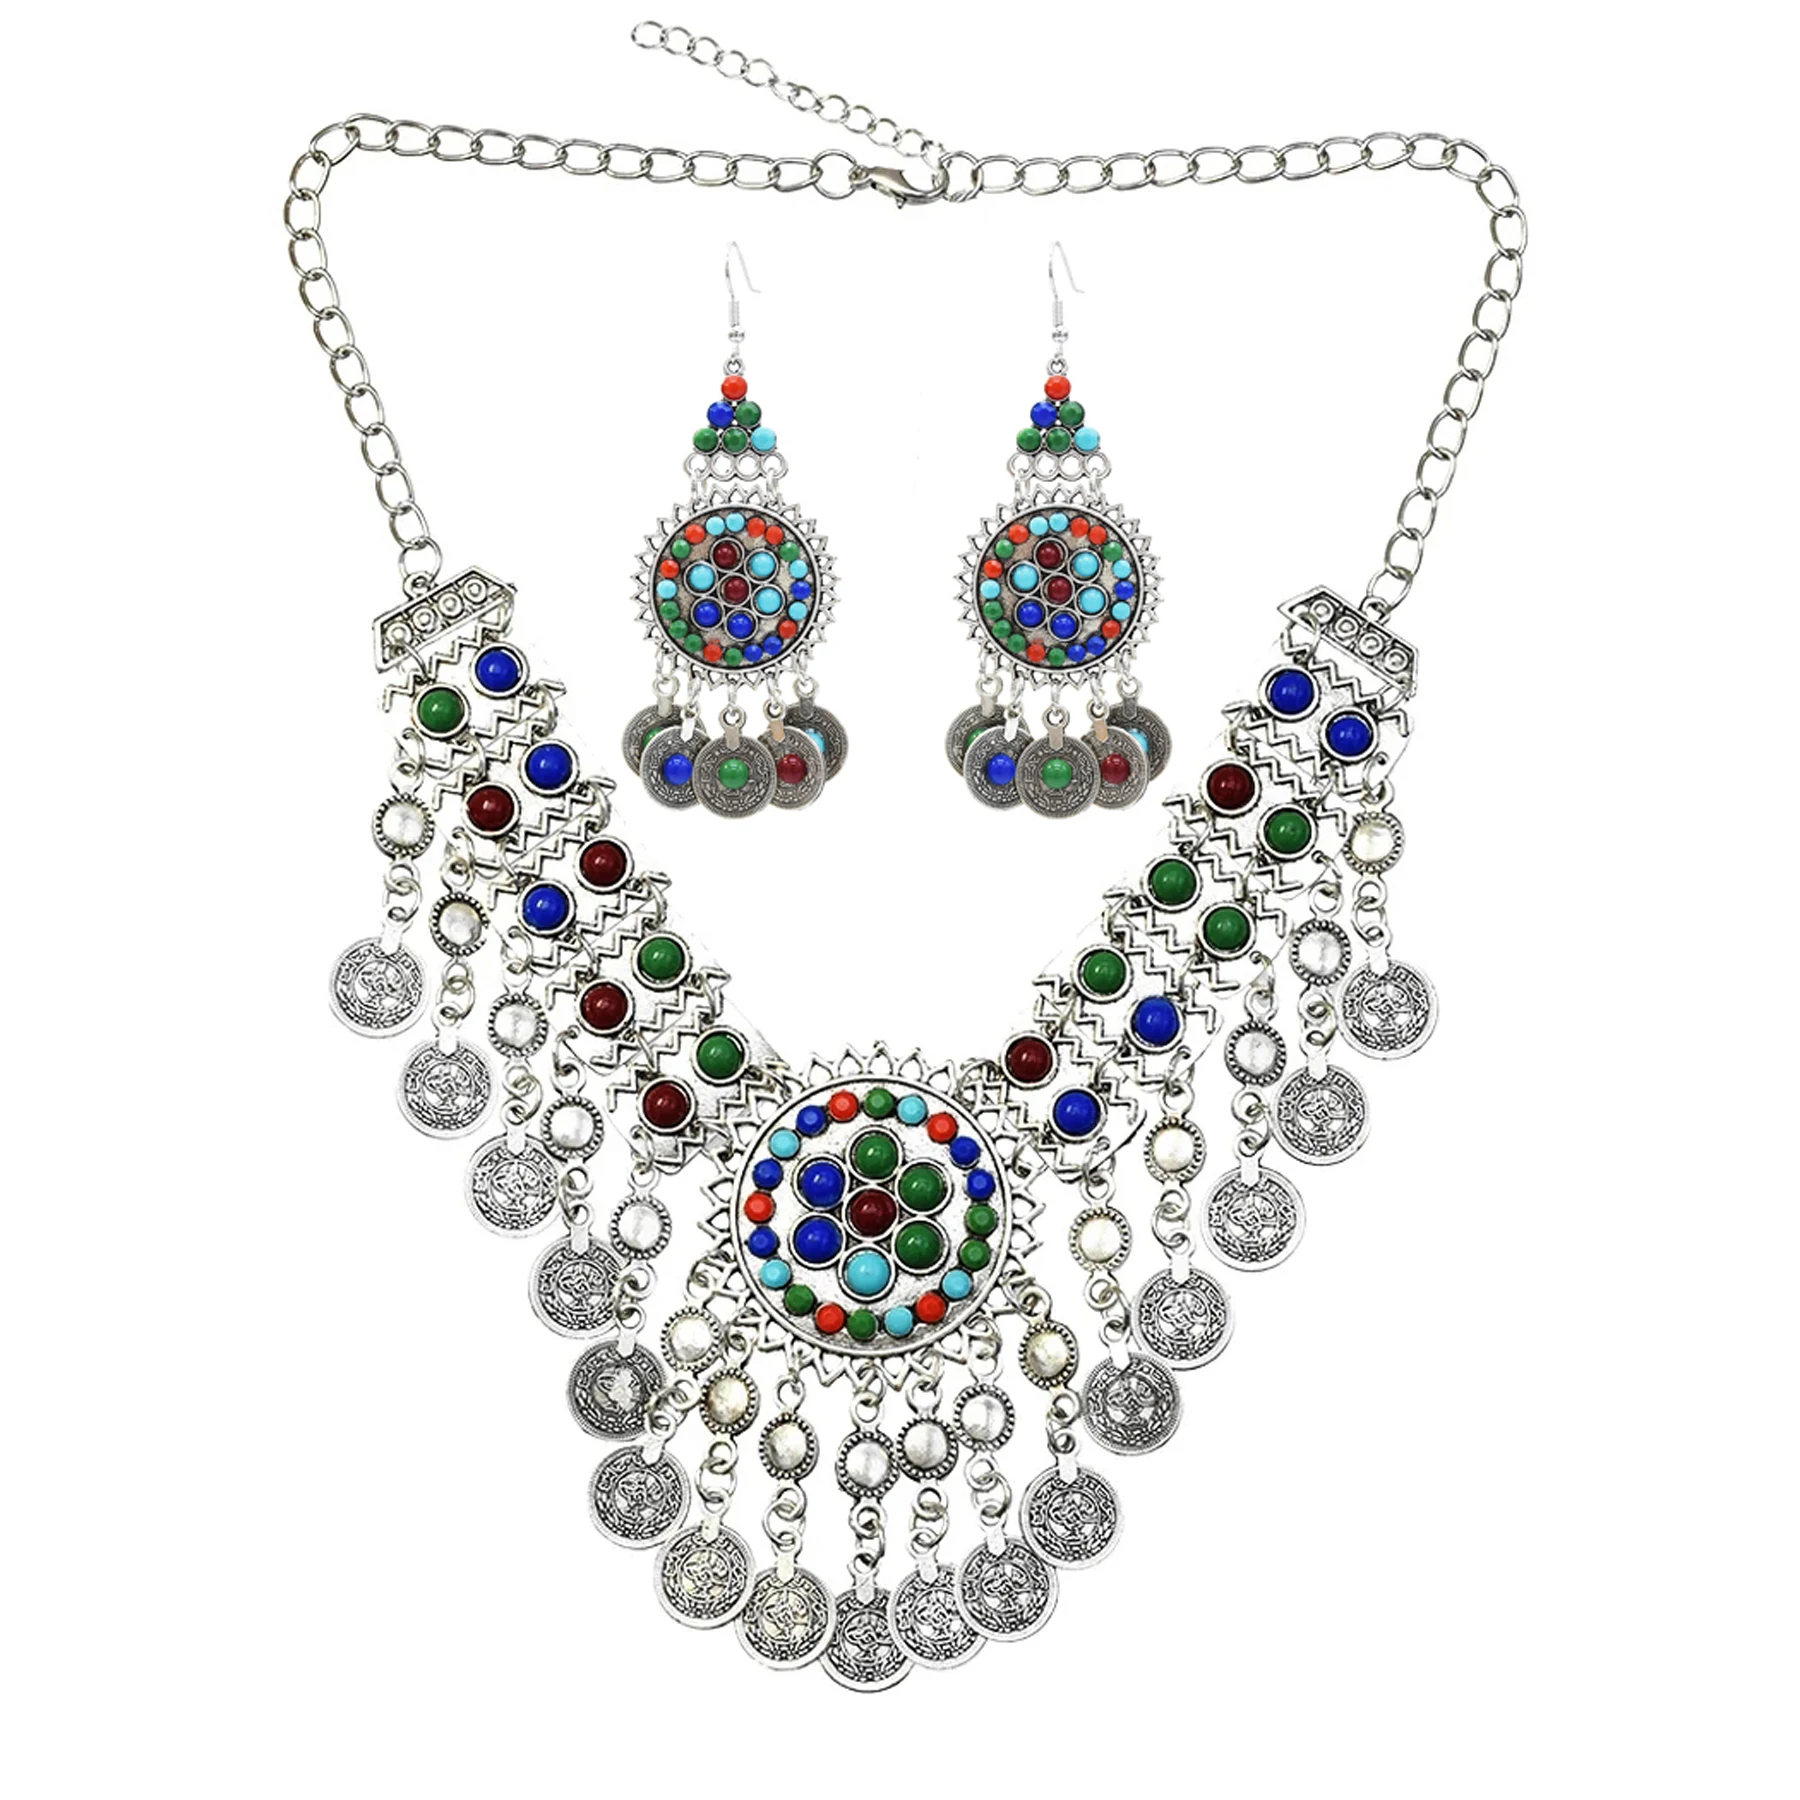 

Vintage Gypsy Coins Tassel Necklace Earrings for Women Boho Ethnic Tribe Colorful Acrylic Rhinestone Choker Collar Jewelry Sets